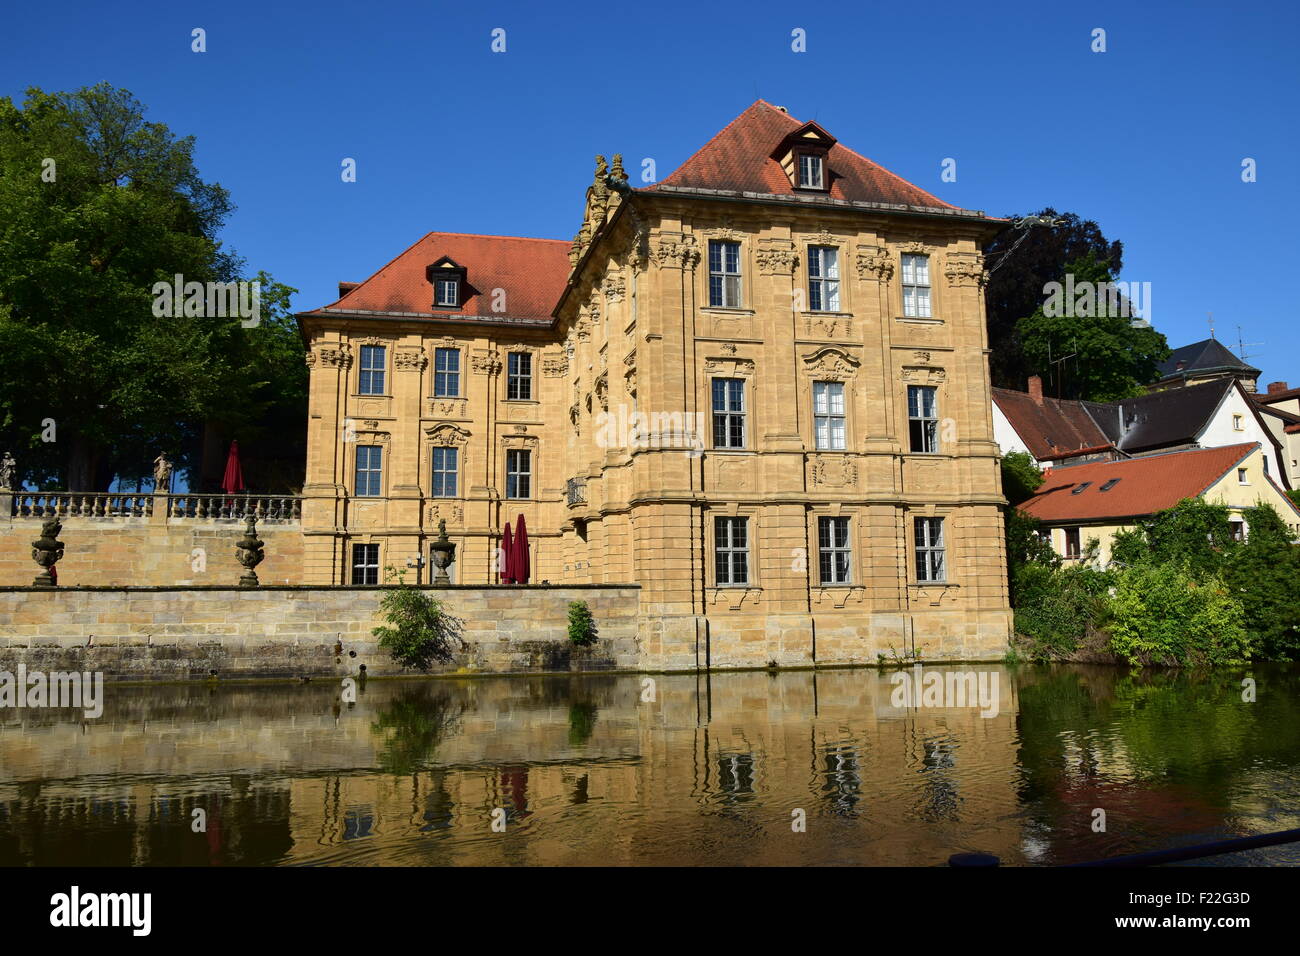 Alamy Villa Page images 11 stock - hi-res germany - and photography